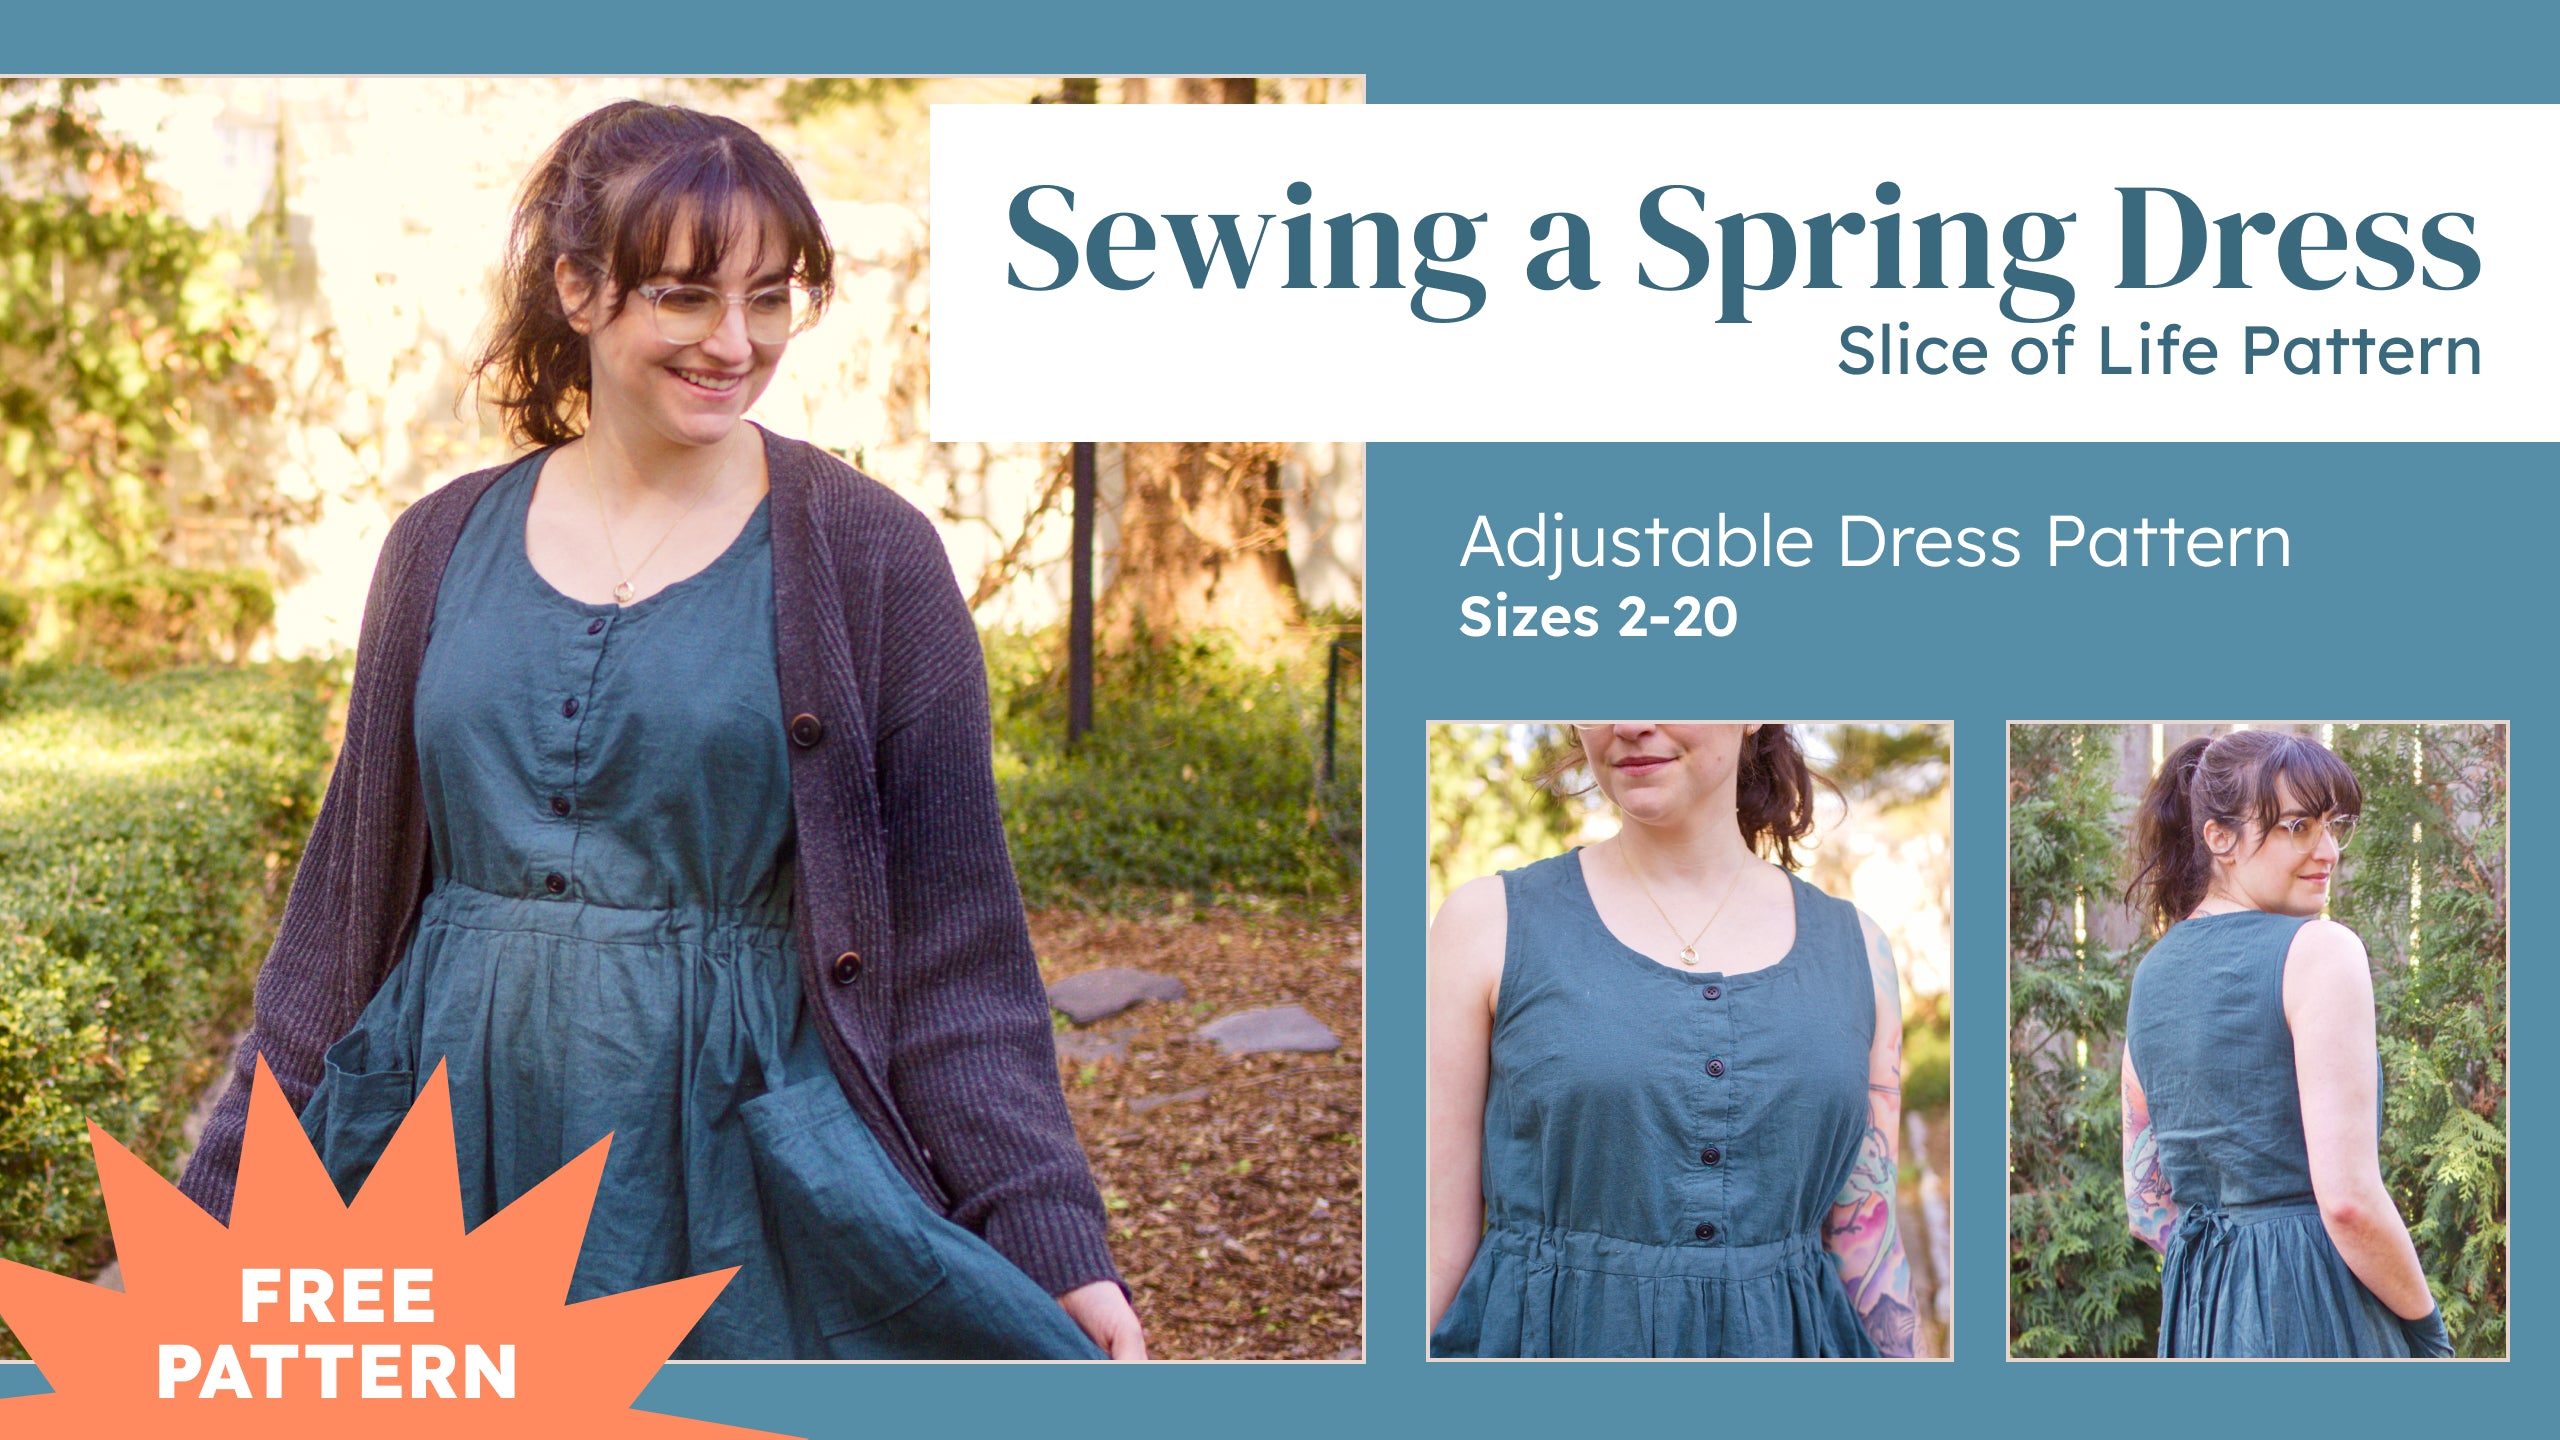 Load video: Sewing an Adjustable Dress | Free Pattern Download